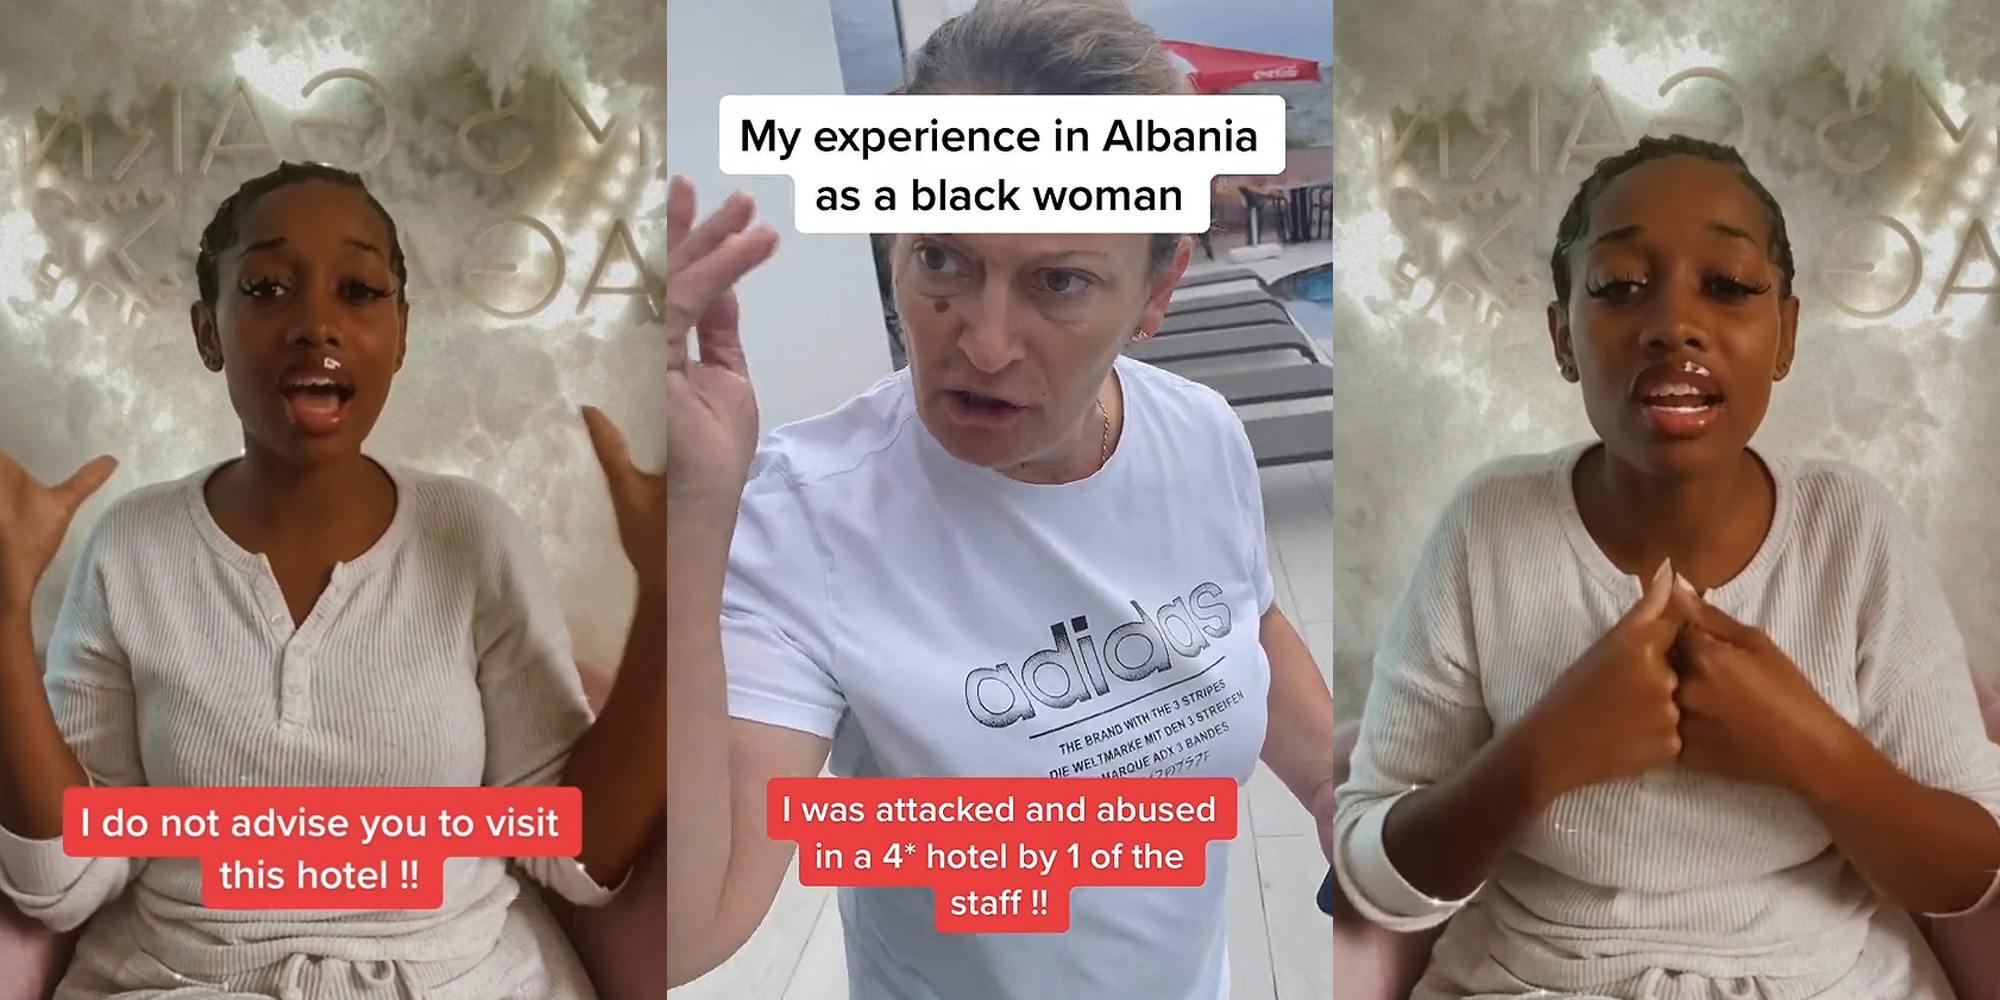 woman speaking hands up in front of white background caption "I do not advise you to visit this hotel !!" (l) woman with hand up outside next to pool caption "My experience in Albania as a black woman" "I was attacked and abused in a 4* hotel by 1 of the staff !!" (c) woman speaking in front of white background hands together (r)